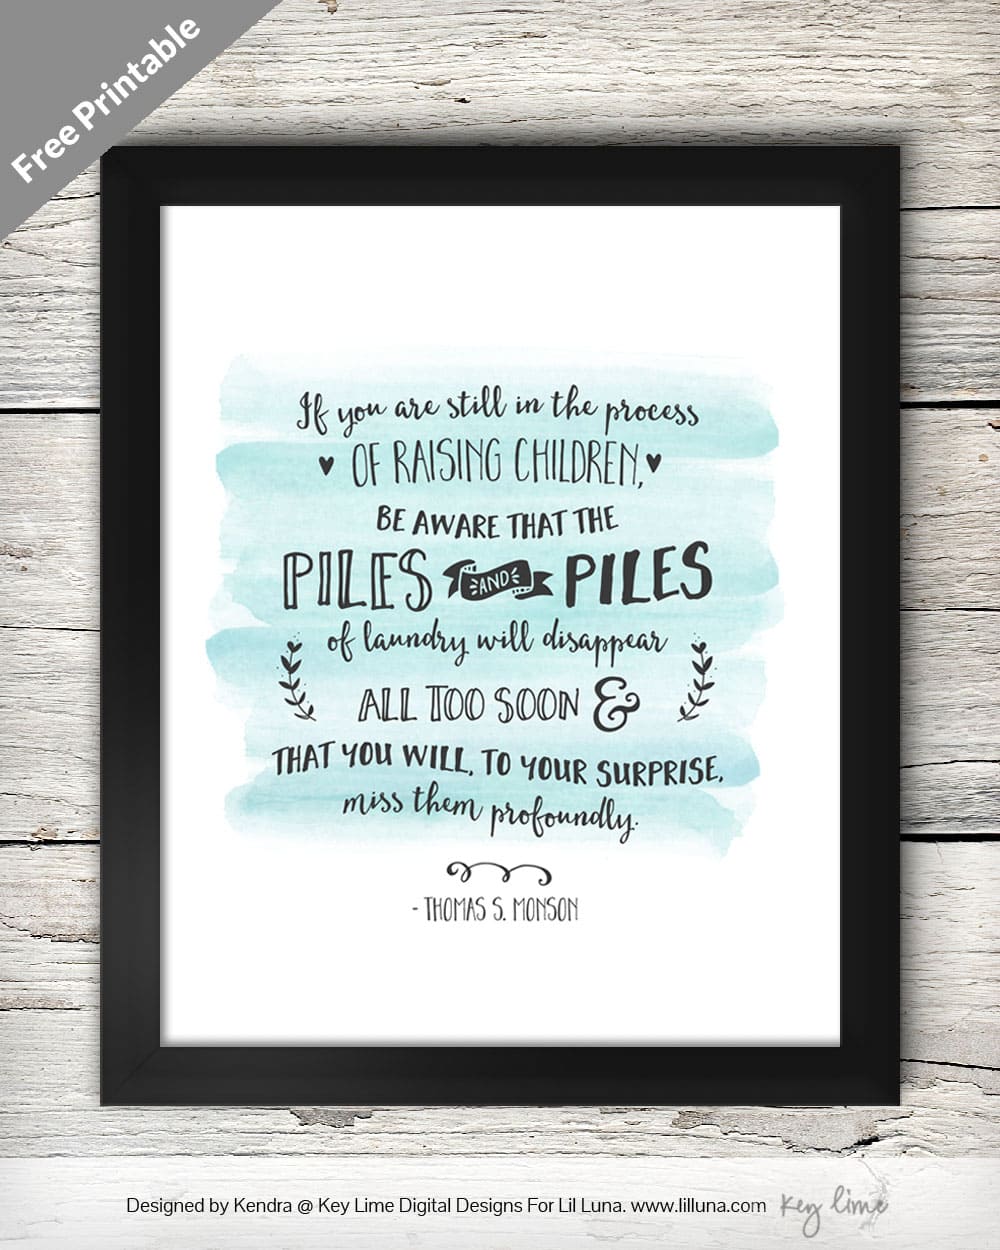 Finding Joy in the Journey Print on { lilluna.com } Love this quote!! Use as decor or give as a gift!